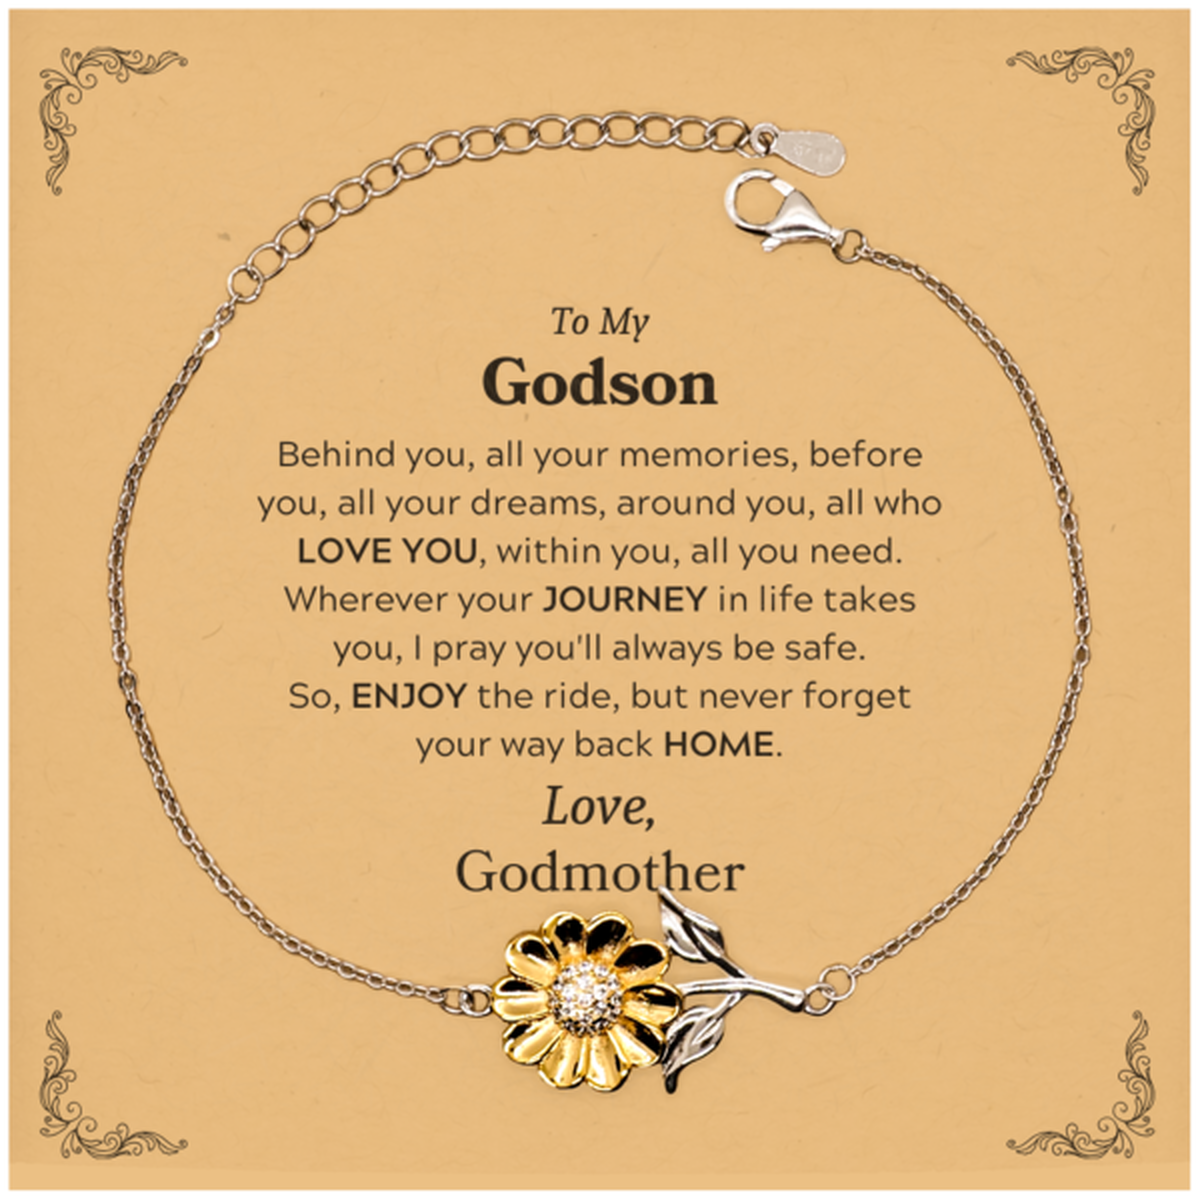 To My Godson Graduation Gifts from Godmother, Godson Sunflower Bracelet Christmas Birthday Gifts for Godson Behind you, all your memories, before you, all your dreams. Love, Godmother